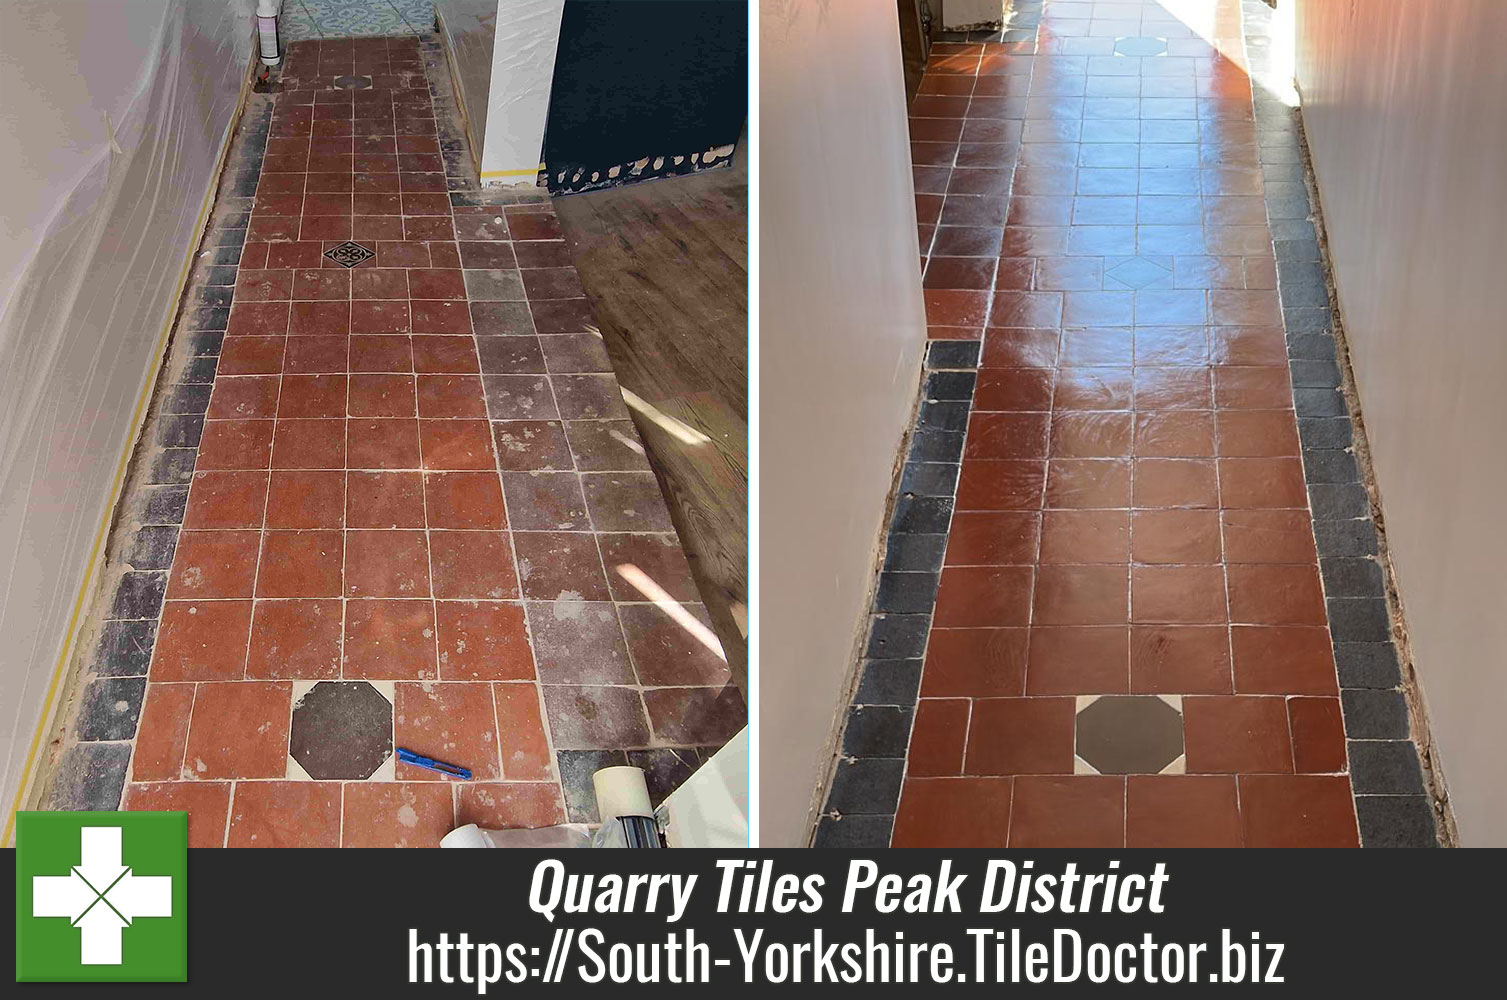 Low Moisture Cleaning of 150 Year Old Quarry Tiles with Tile Doctor Acid Gel in the Yorkshire Peak District